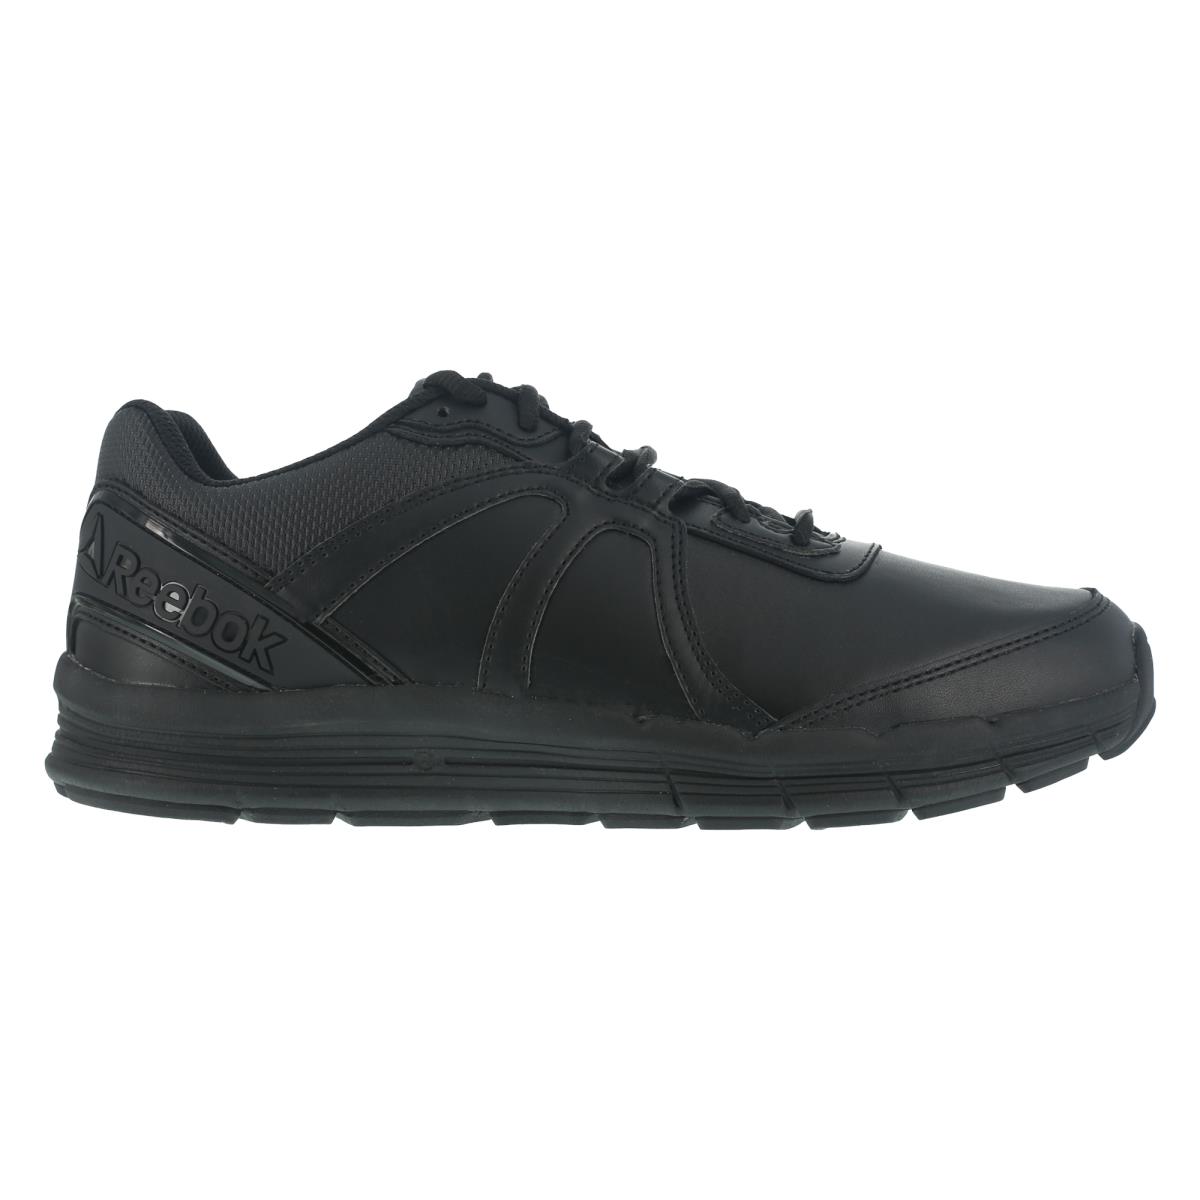 Reebok Mens Black Leather Work Shoes Oxford Guide M